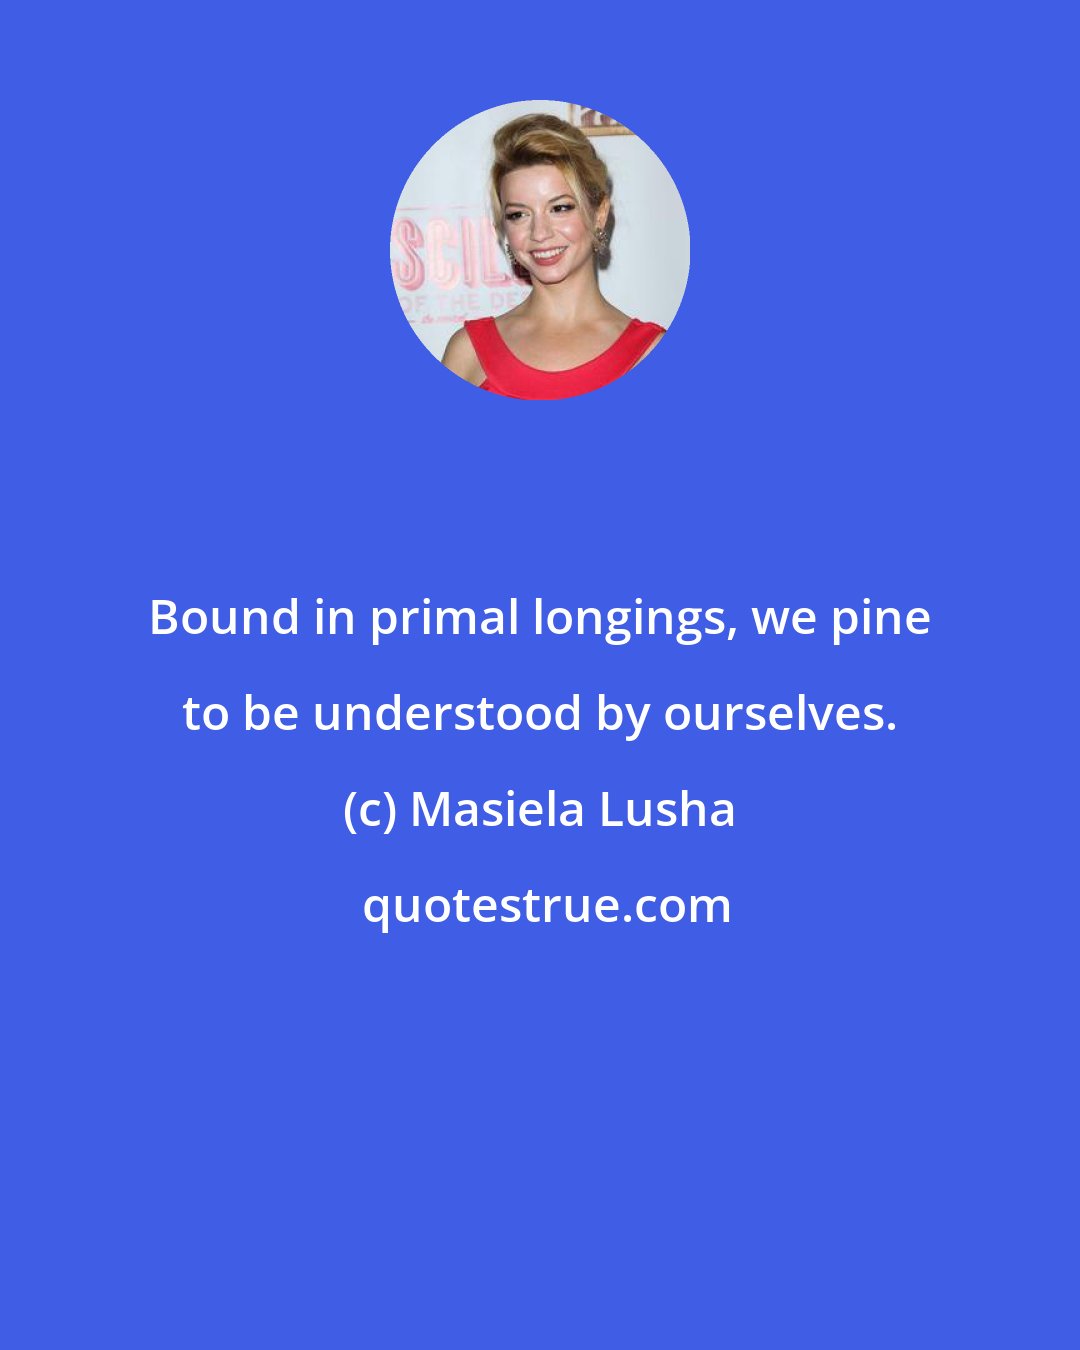 Masiela Lusha: Bound in primal longings, we pine to be understood by ourselves.